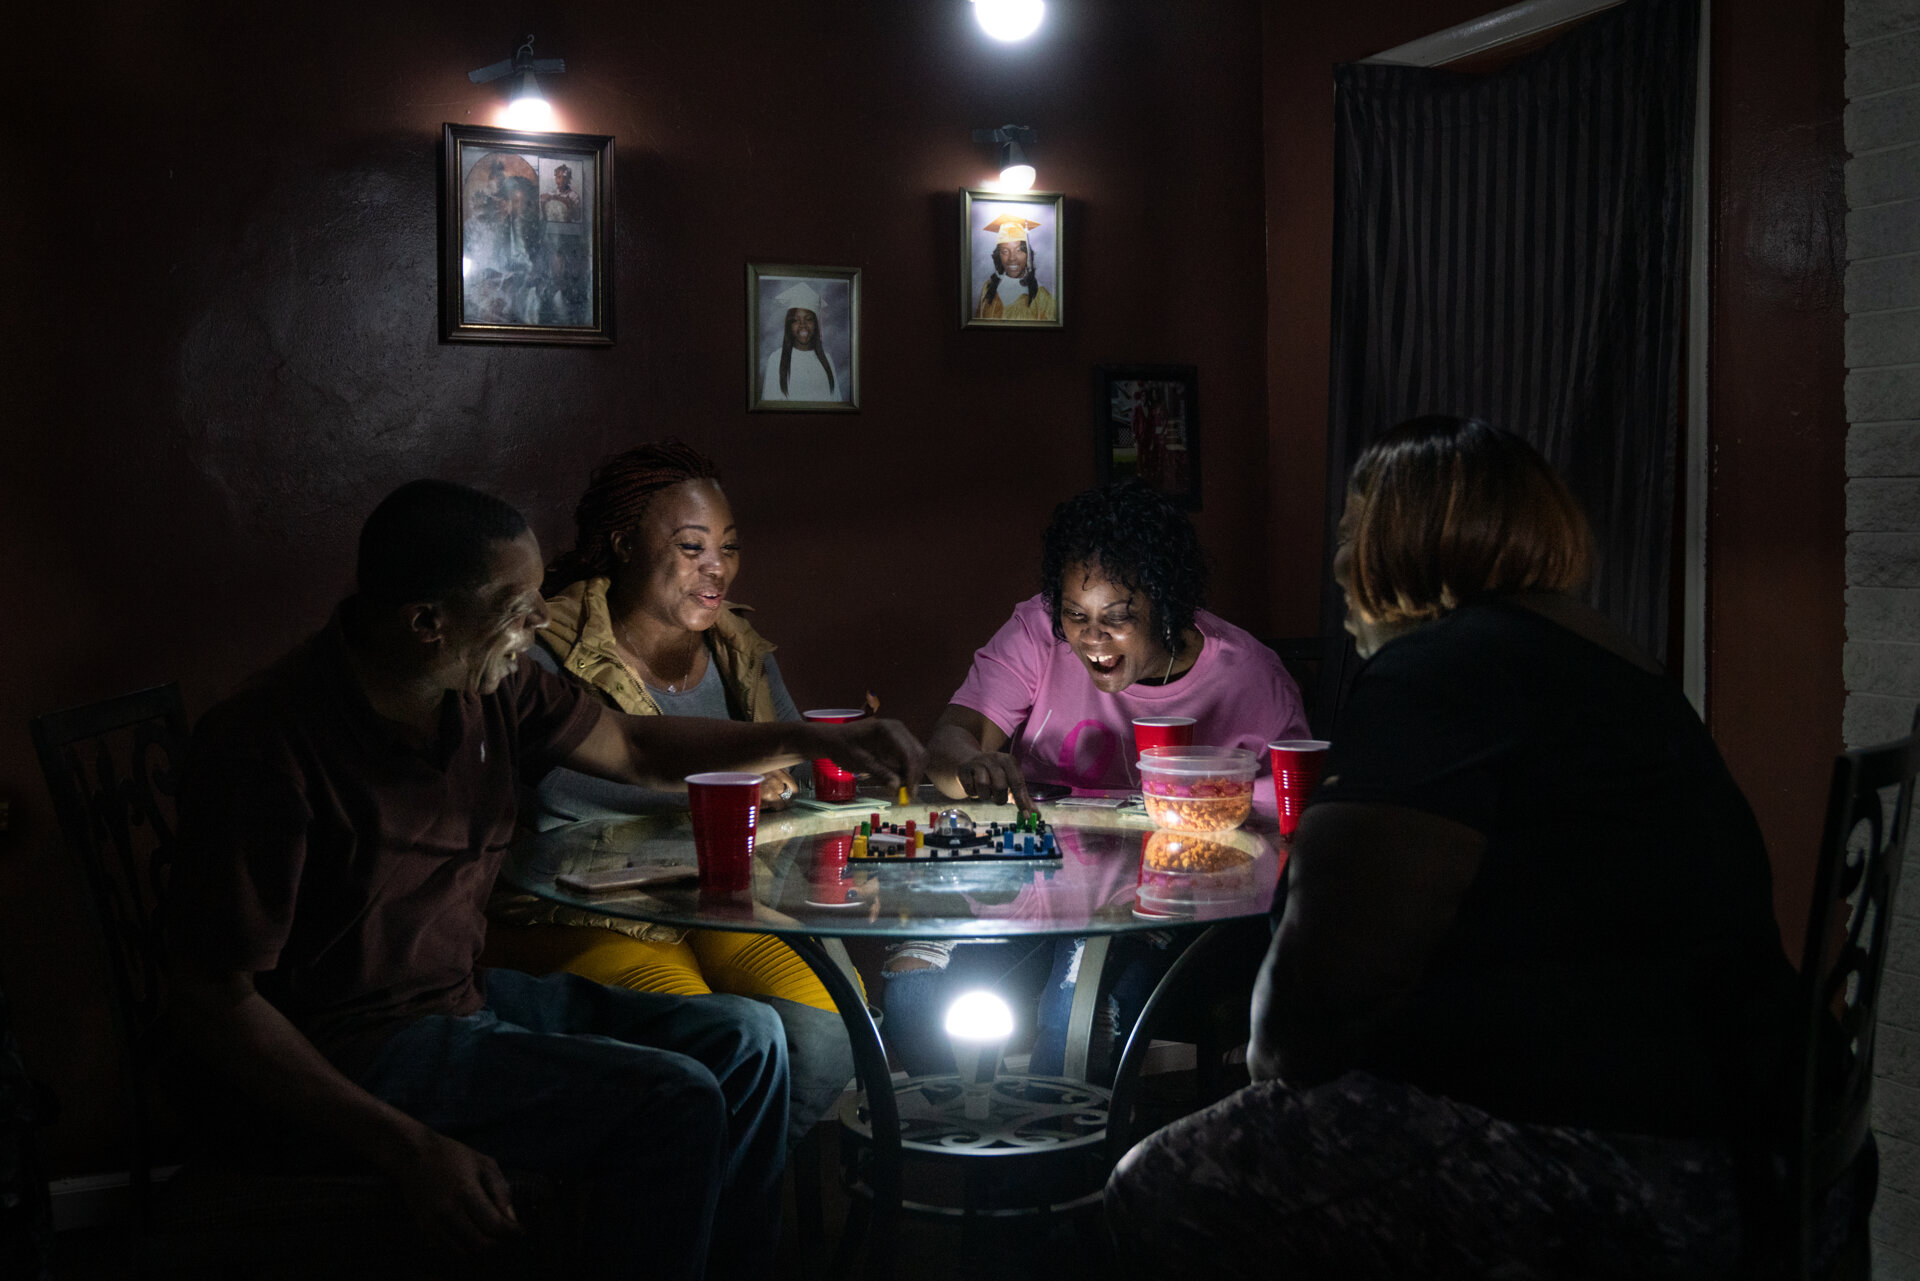  Shavone Travick enjoys a weekly game night with friends and family, lit by the glow of a solar powered home. 